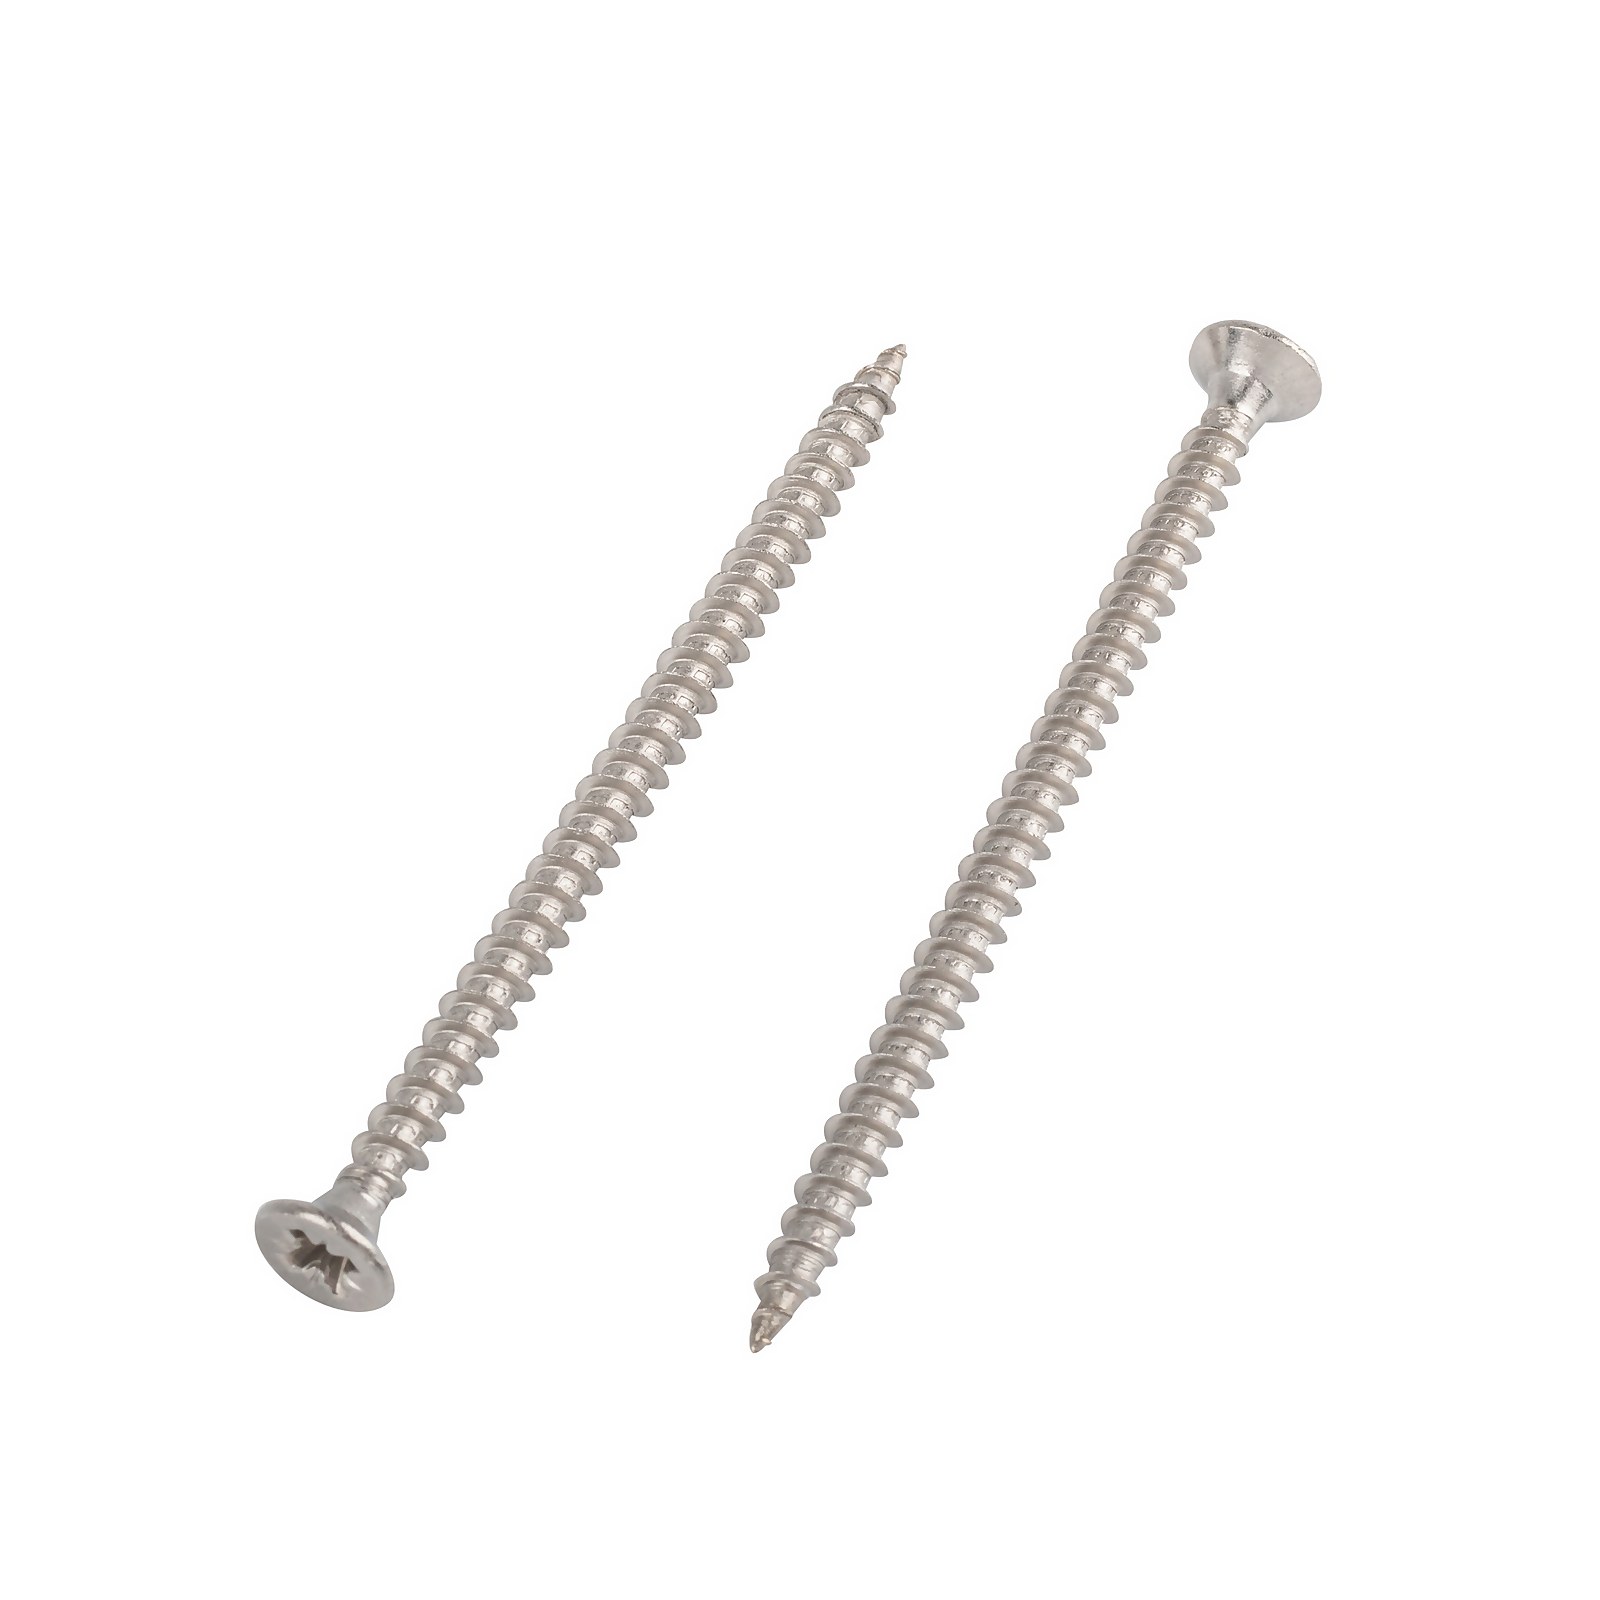 Photo of Homebase Stainless Steel Single Thread Screw 4 X 65mm 25 Pack